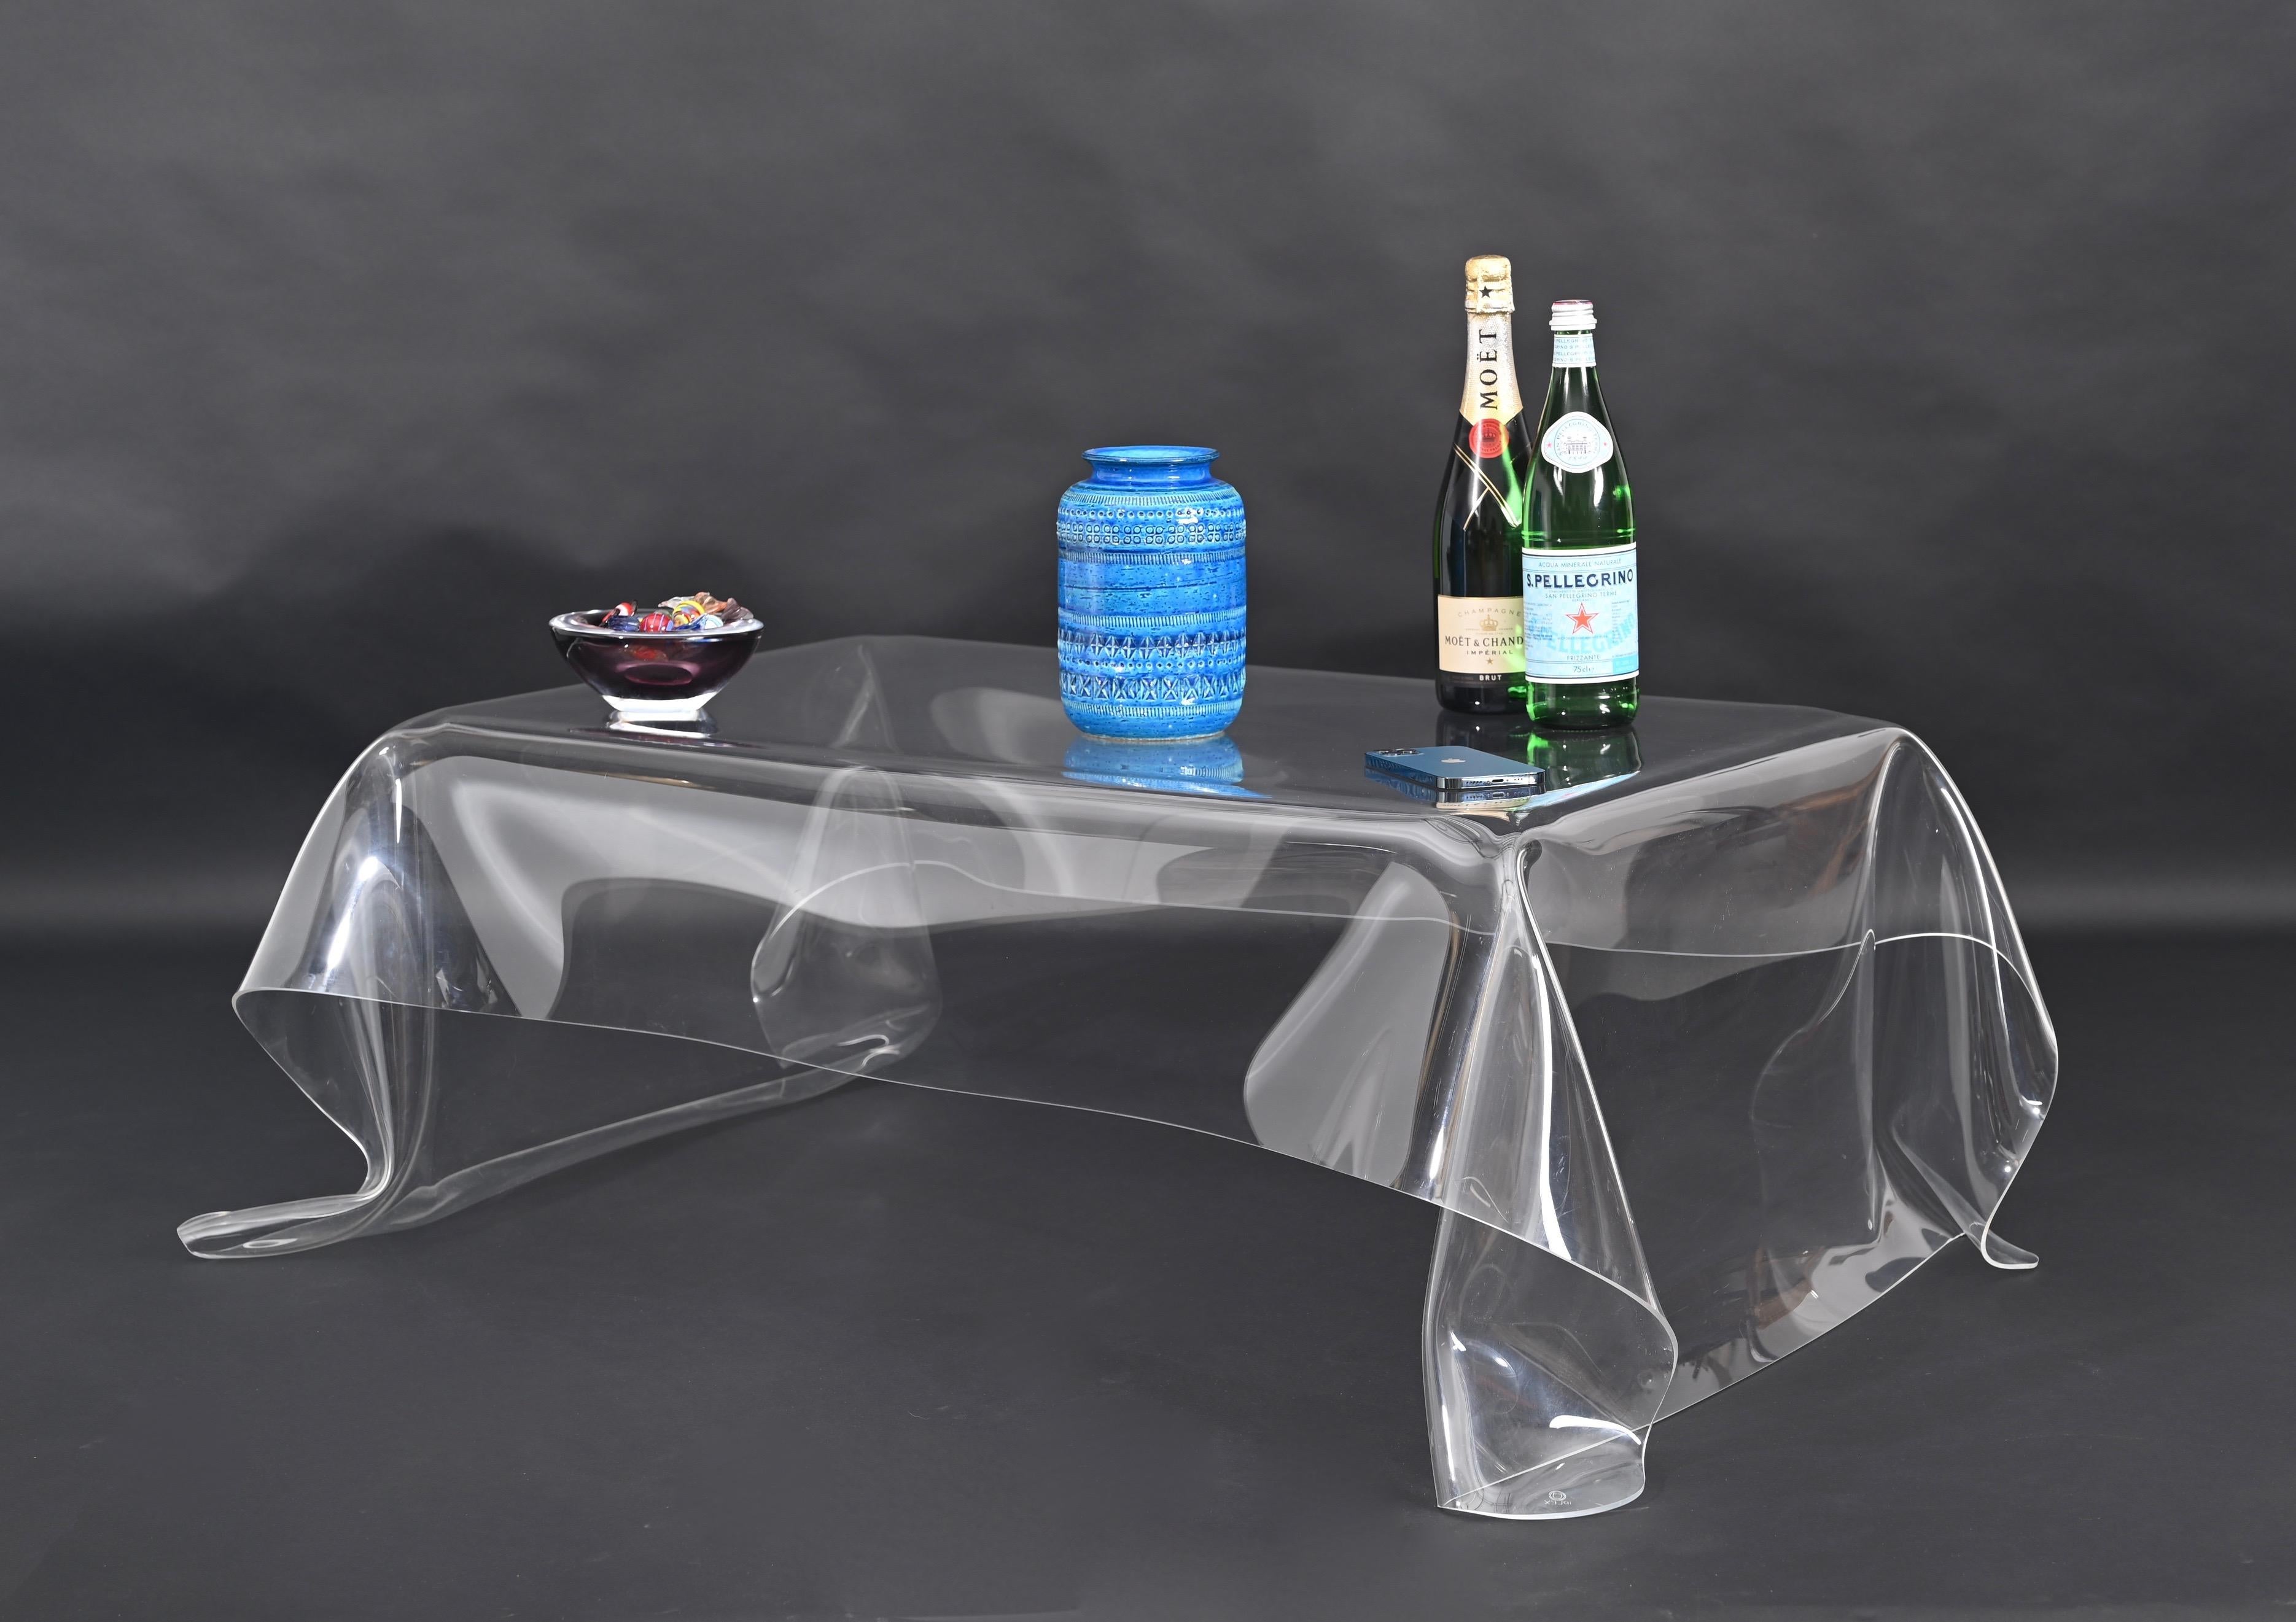 Wonderful mid-century coffee or cocktail table in clear lucite. This amazing table was produced in Italy during the 1980s.

The table is made of a single piece of lucite featuring a rectangular top and a gorgeous curved base. The quality and the